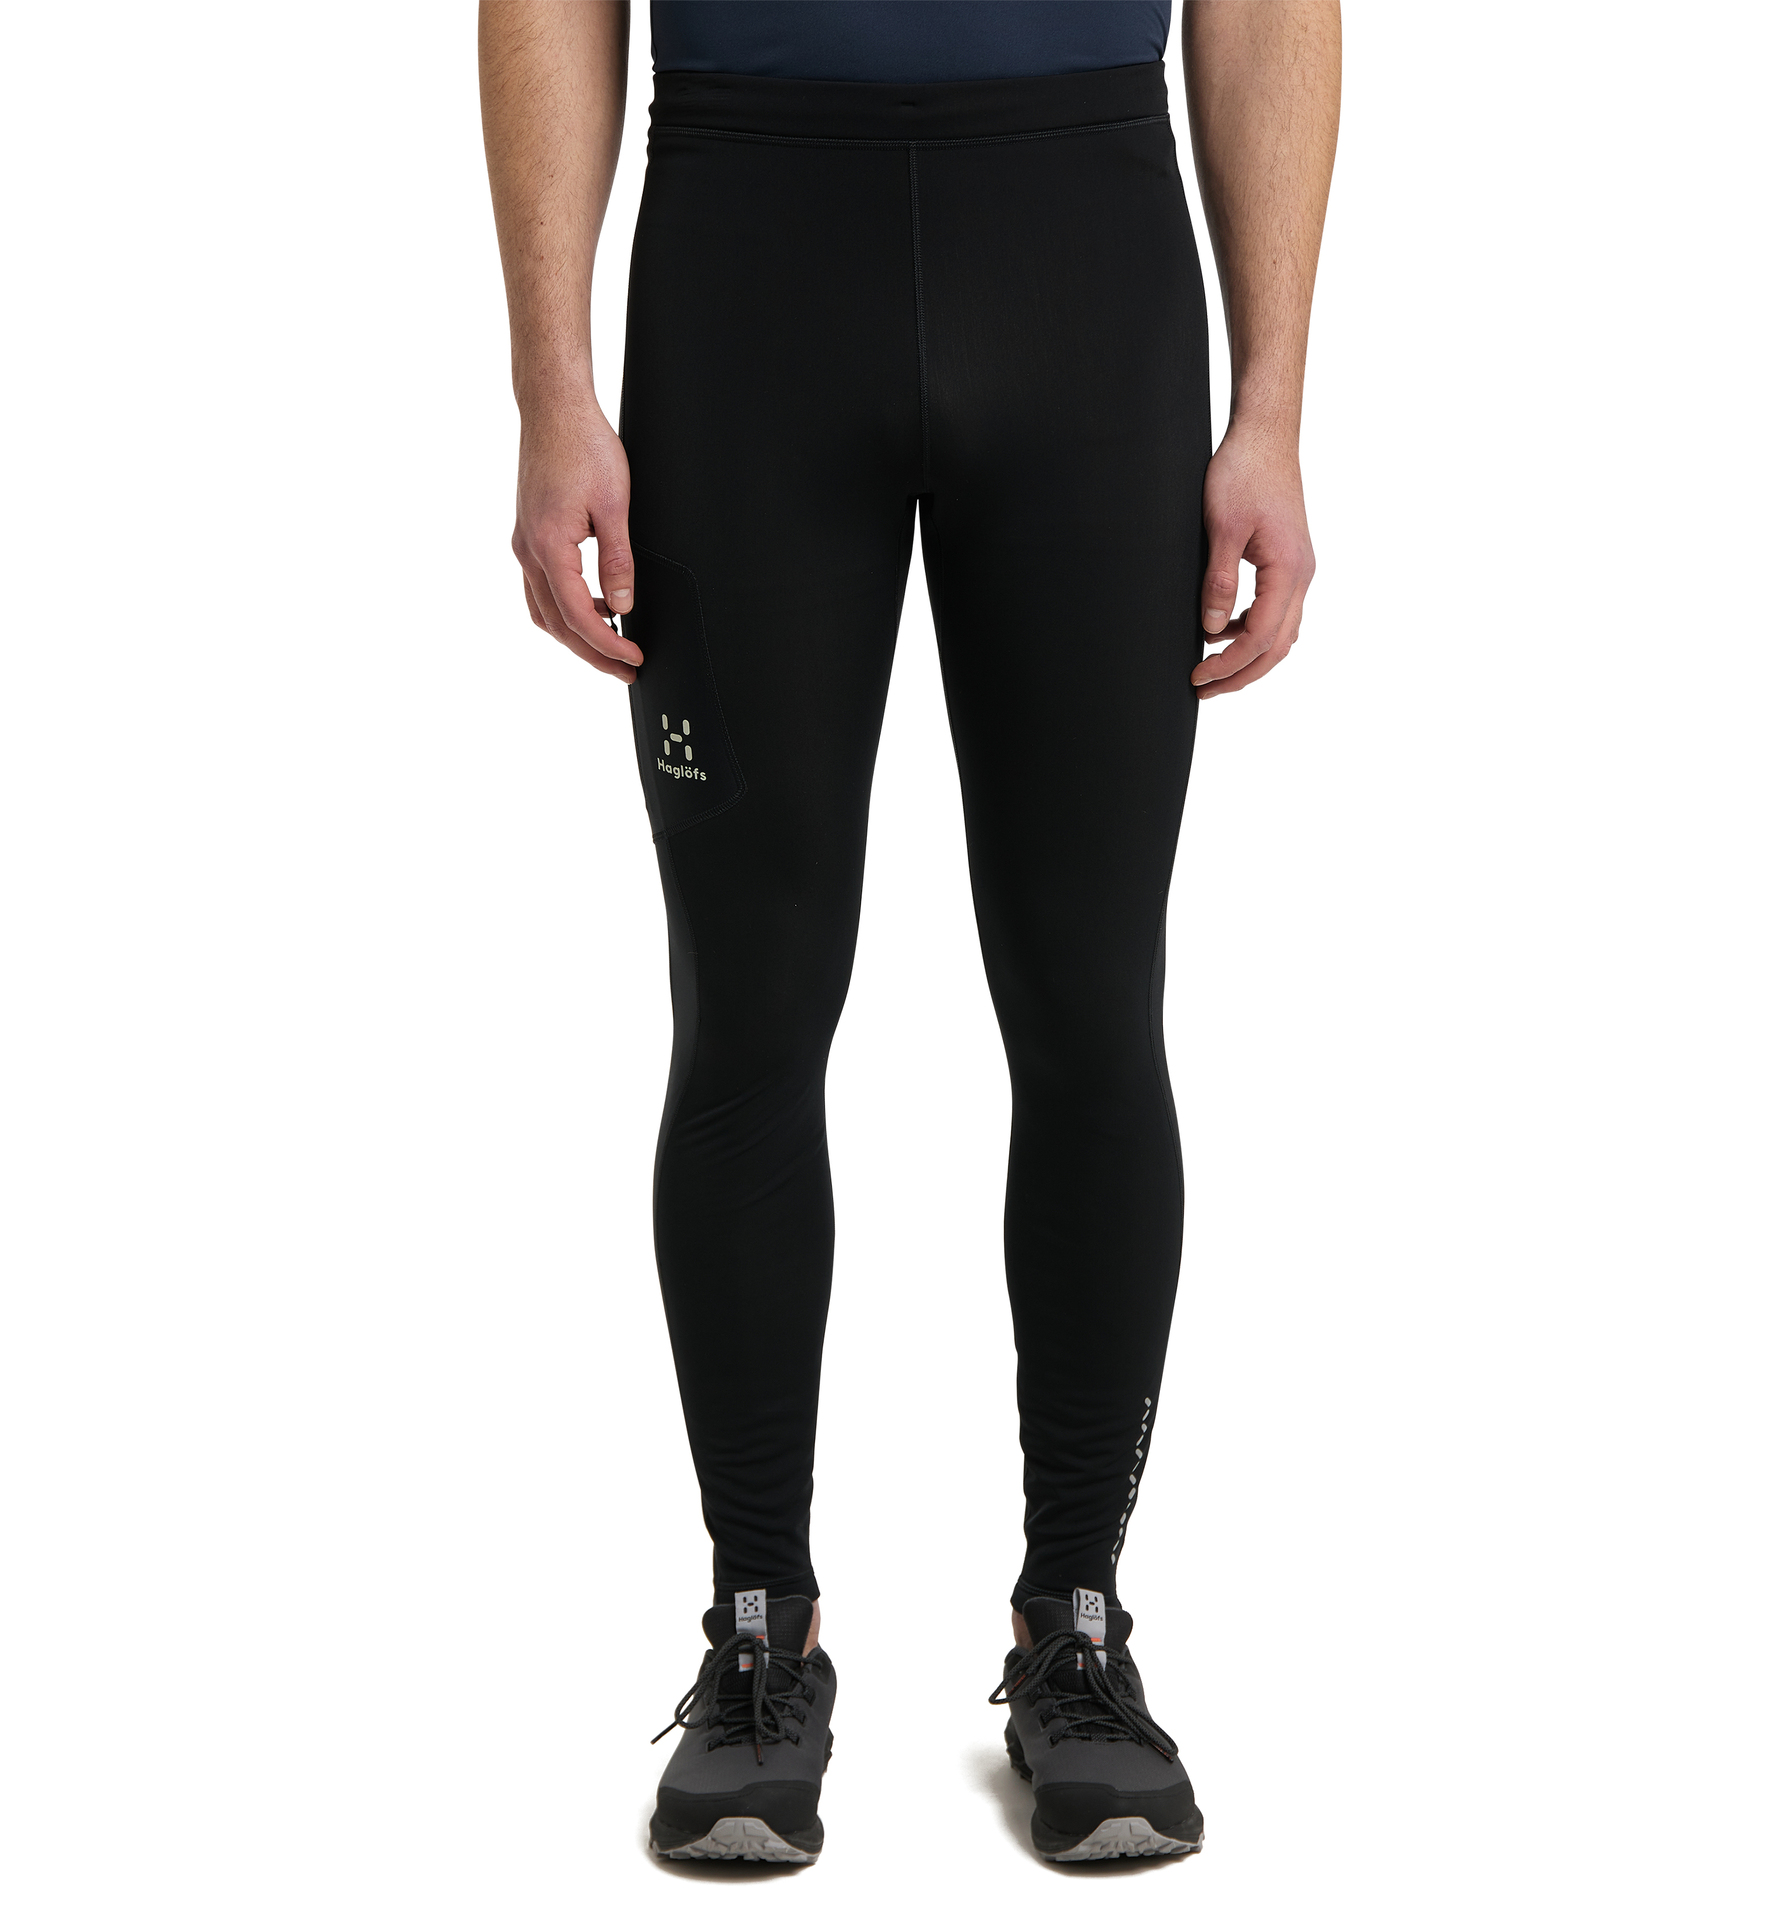 Buy UBBEATABLE Men's Compression Workout Shorts Leggings with Pockets for  Phone - Base Layer Tights, Short Pants Online In India At Discounted Prices